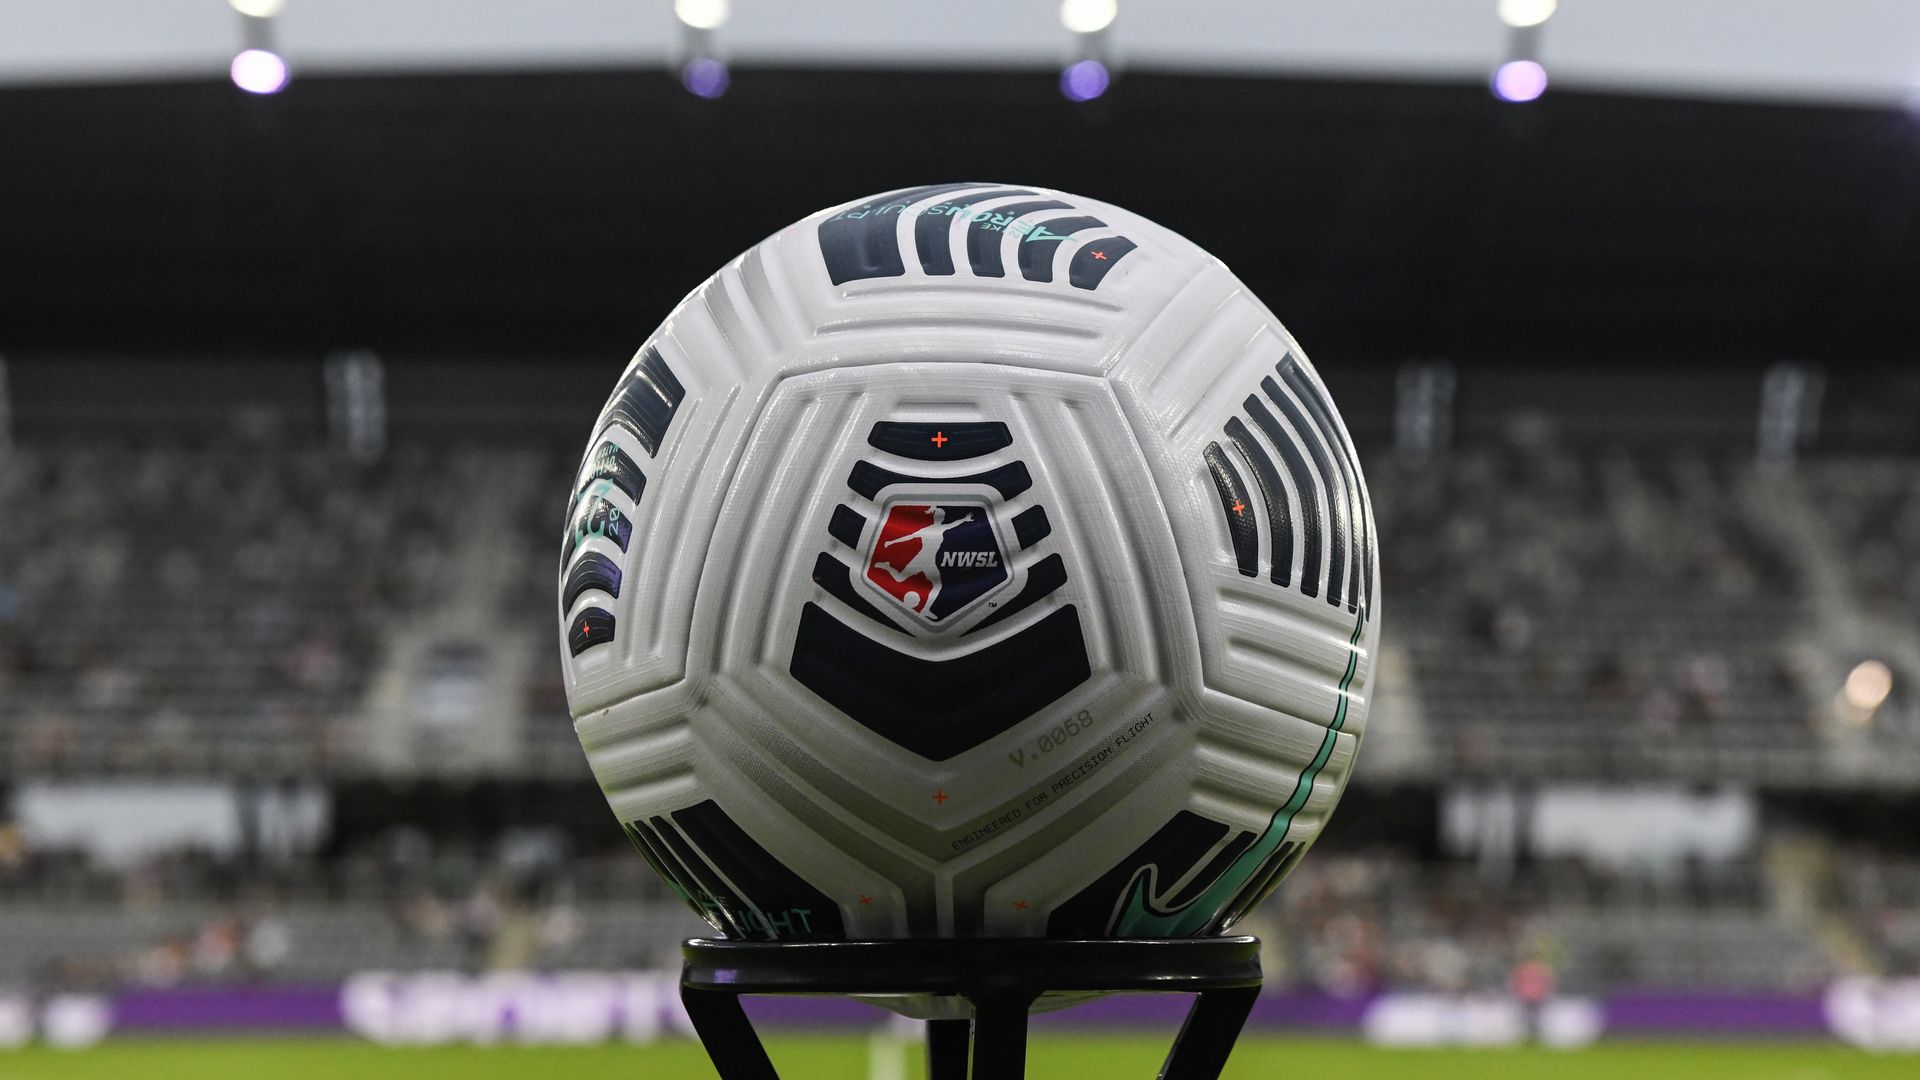 The official game ball awaits the match before a game between OL Reign and Racing Louisville FC at Lynn Family Stadium on September 4, 2021 in Louisville, Kentucky